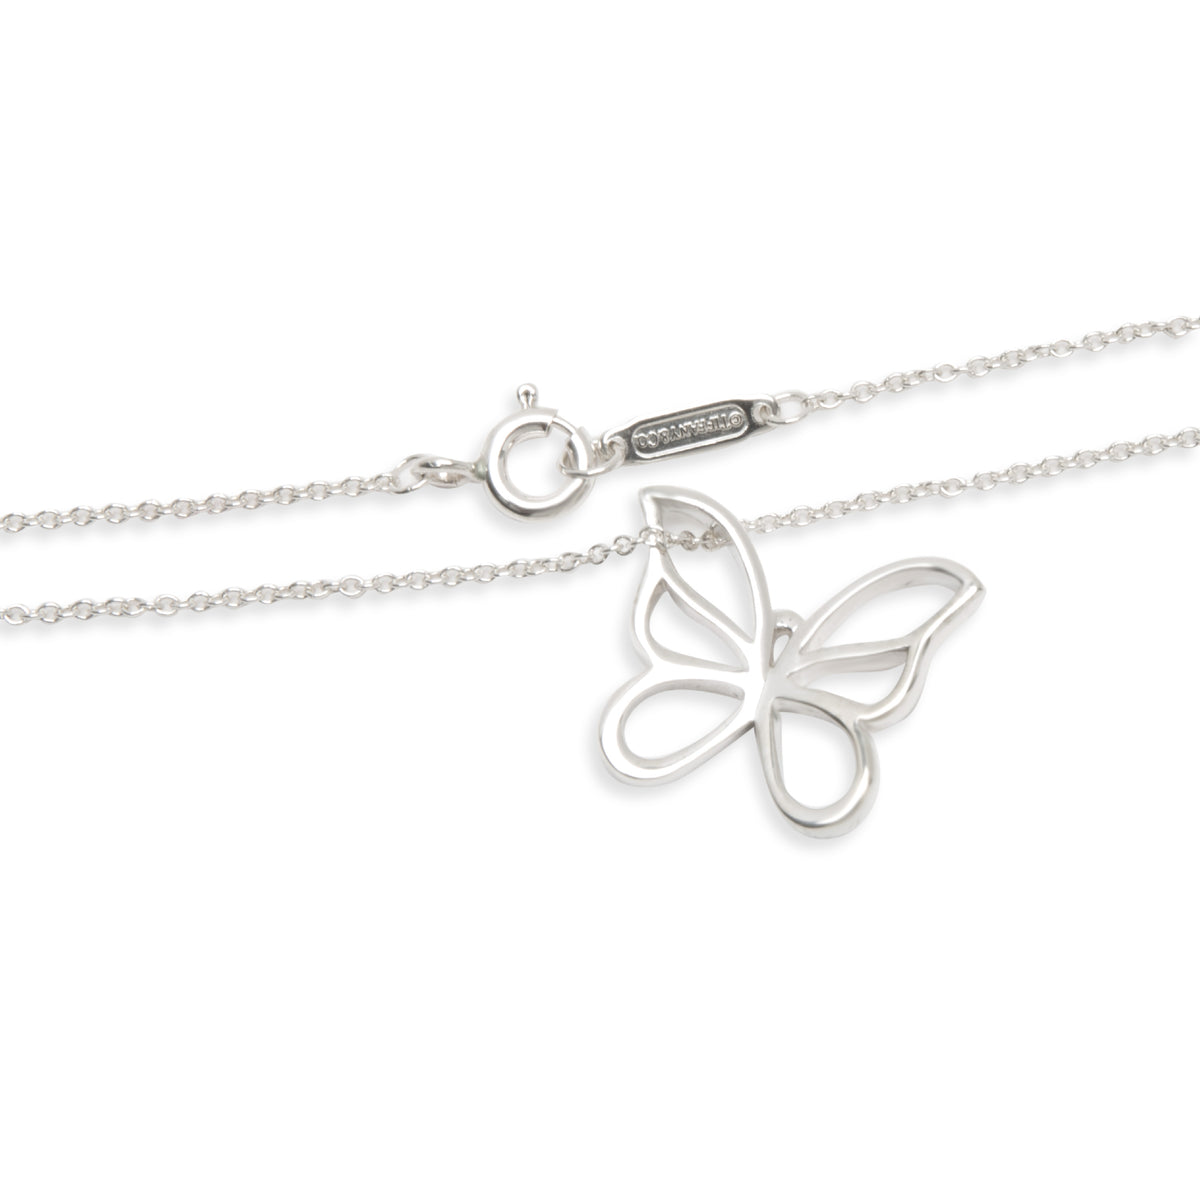 Tiffany & Co. Butterfly Necklace in Sterling Silver